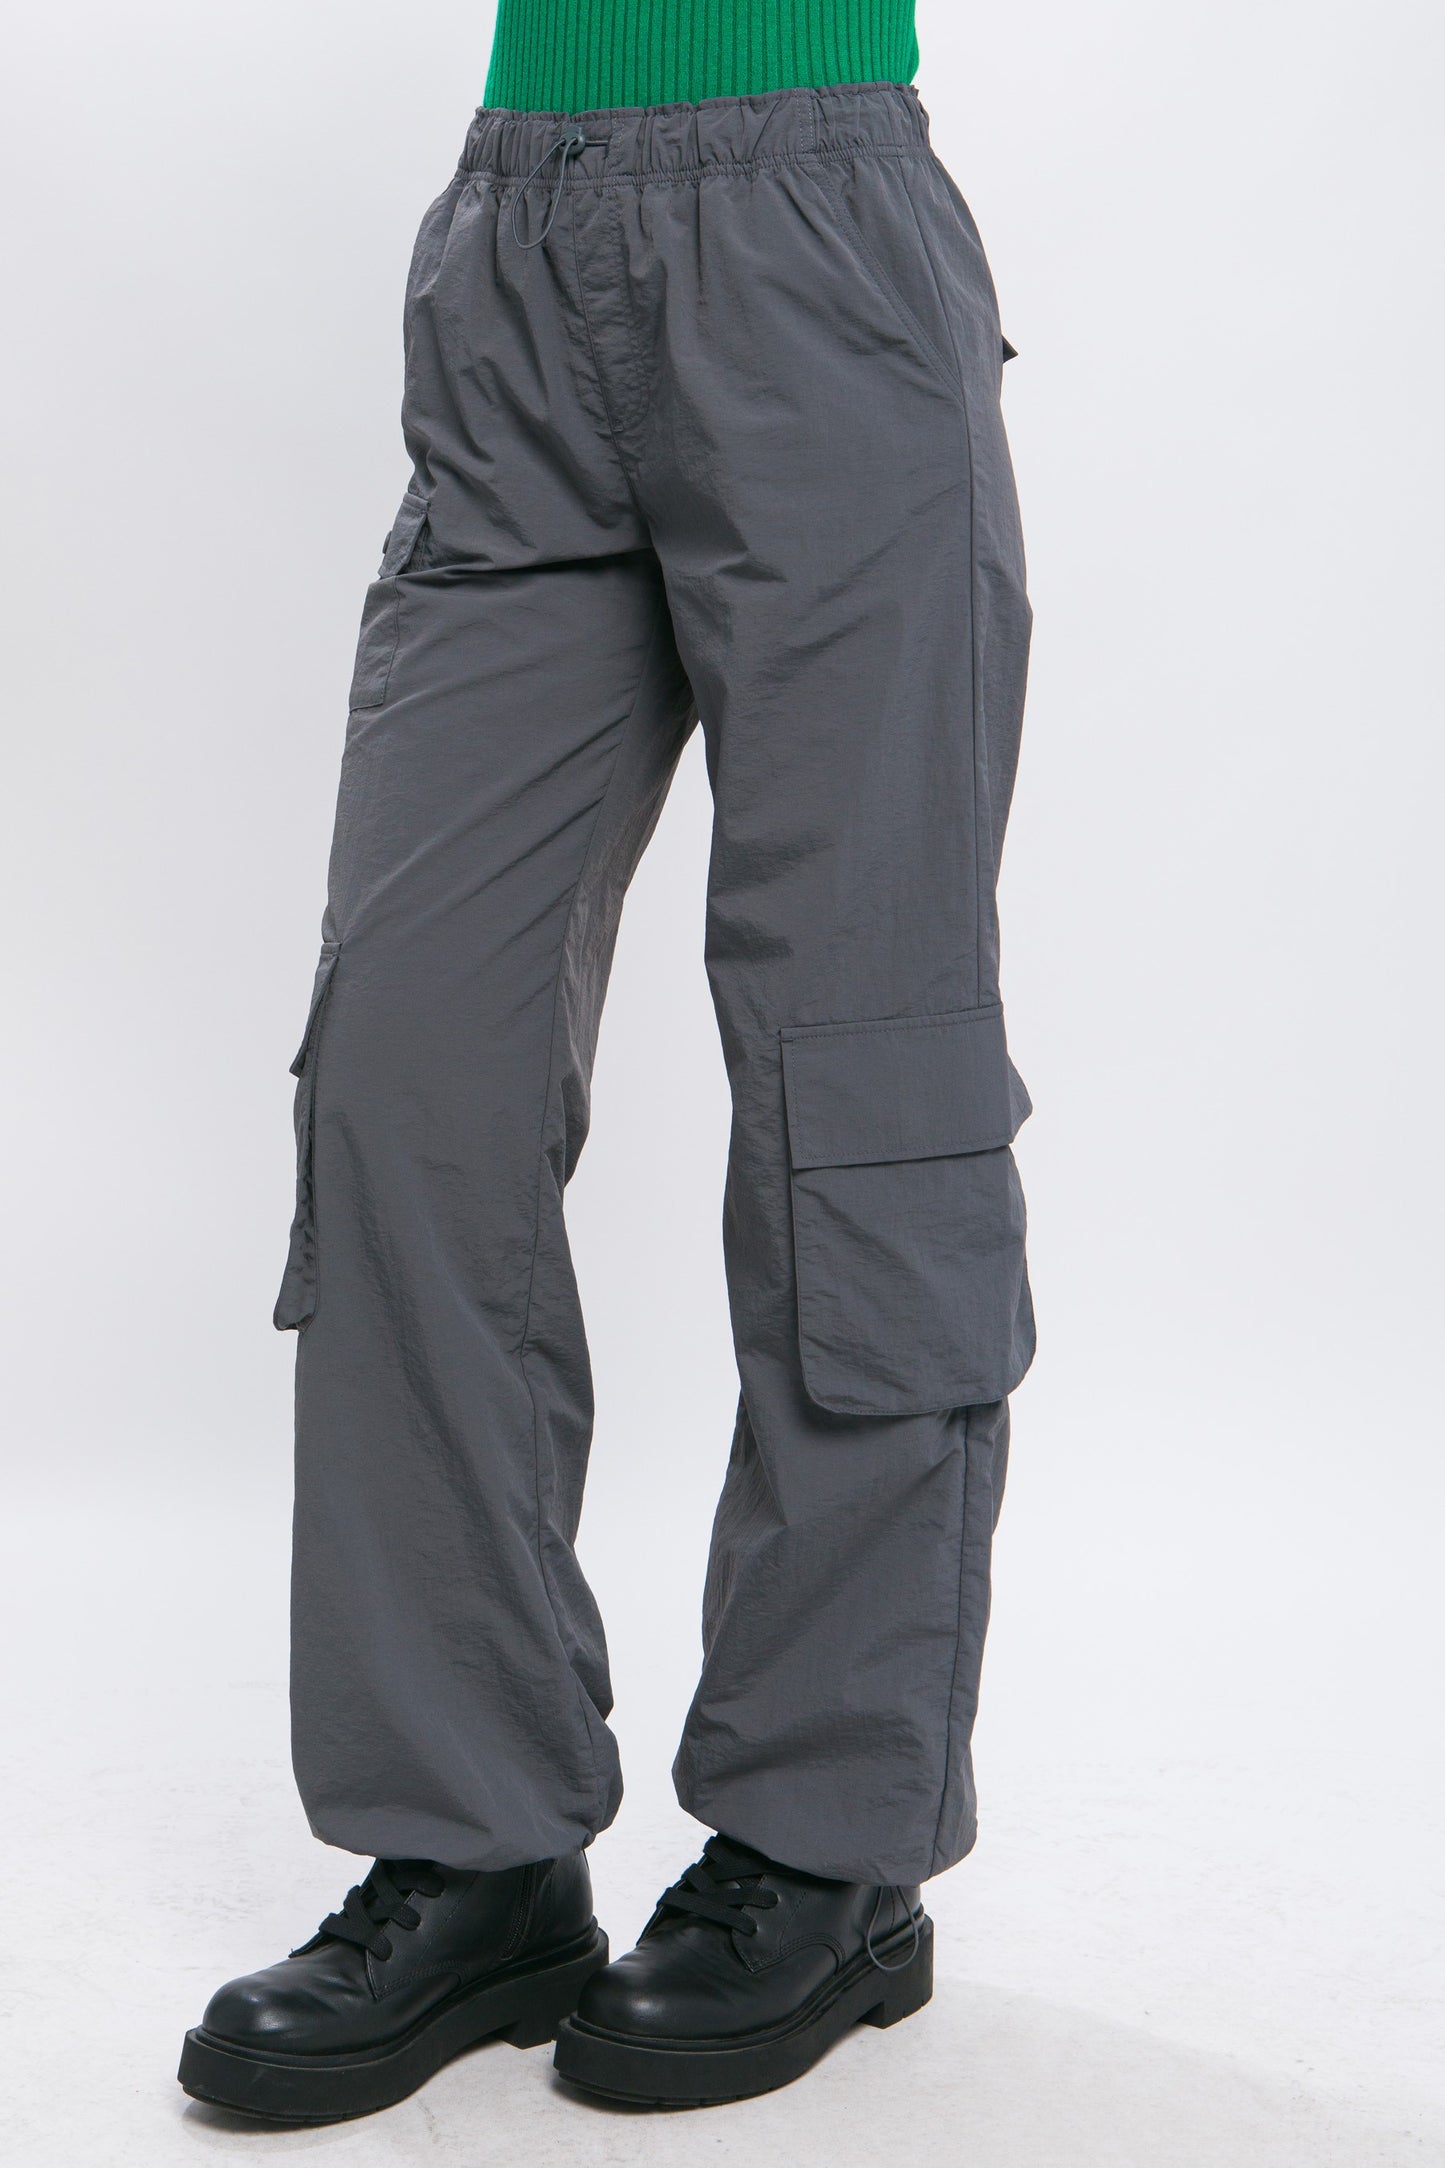 Charcoal Cargo Pants w/ Adjustable Cuff